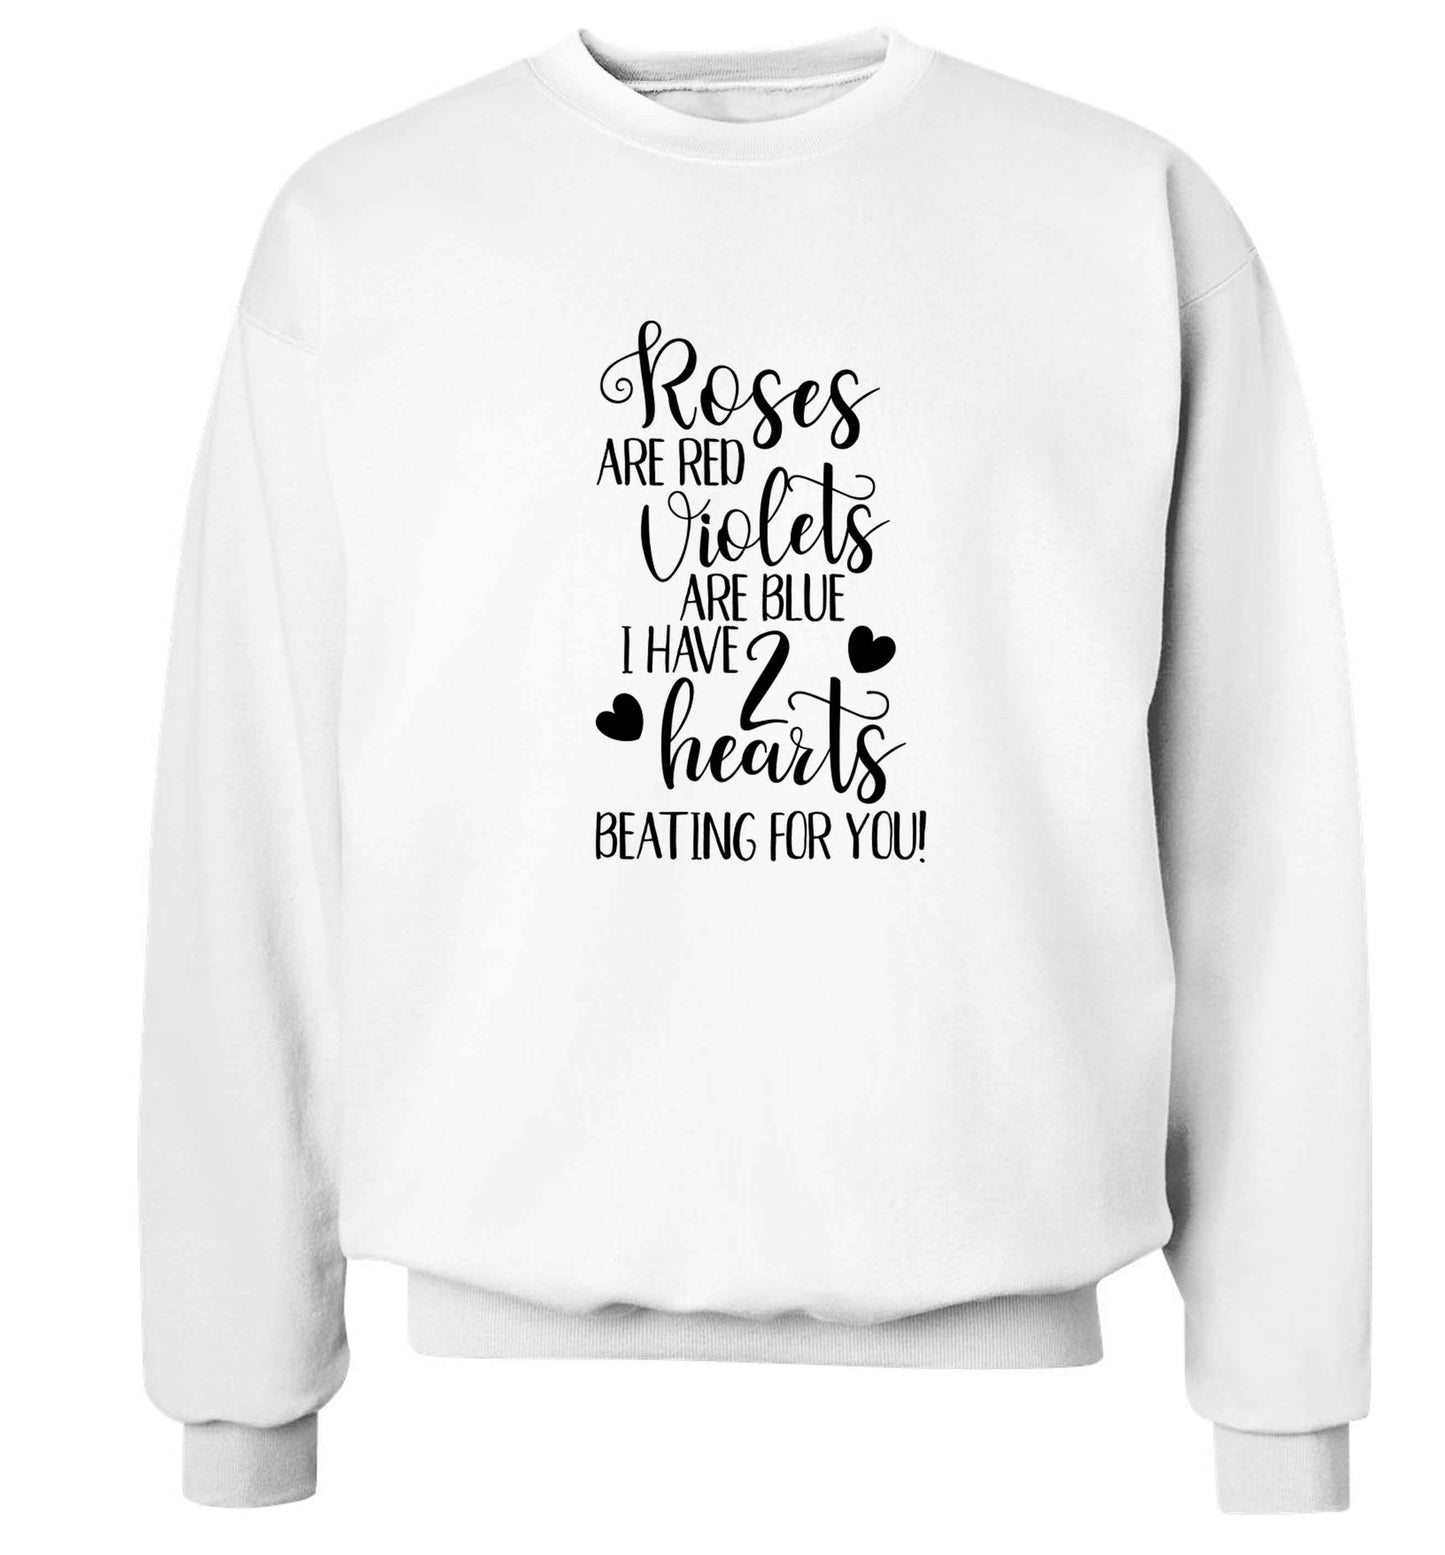 Roses are red violets are blue I have two hearts beating for you Adult's unisex white Sweater 2XL